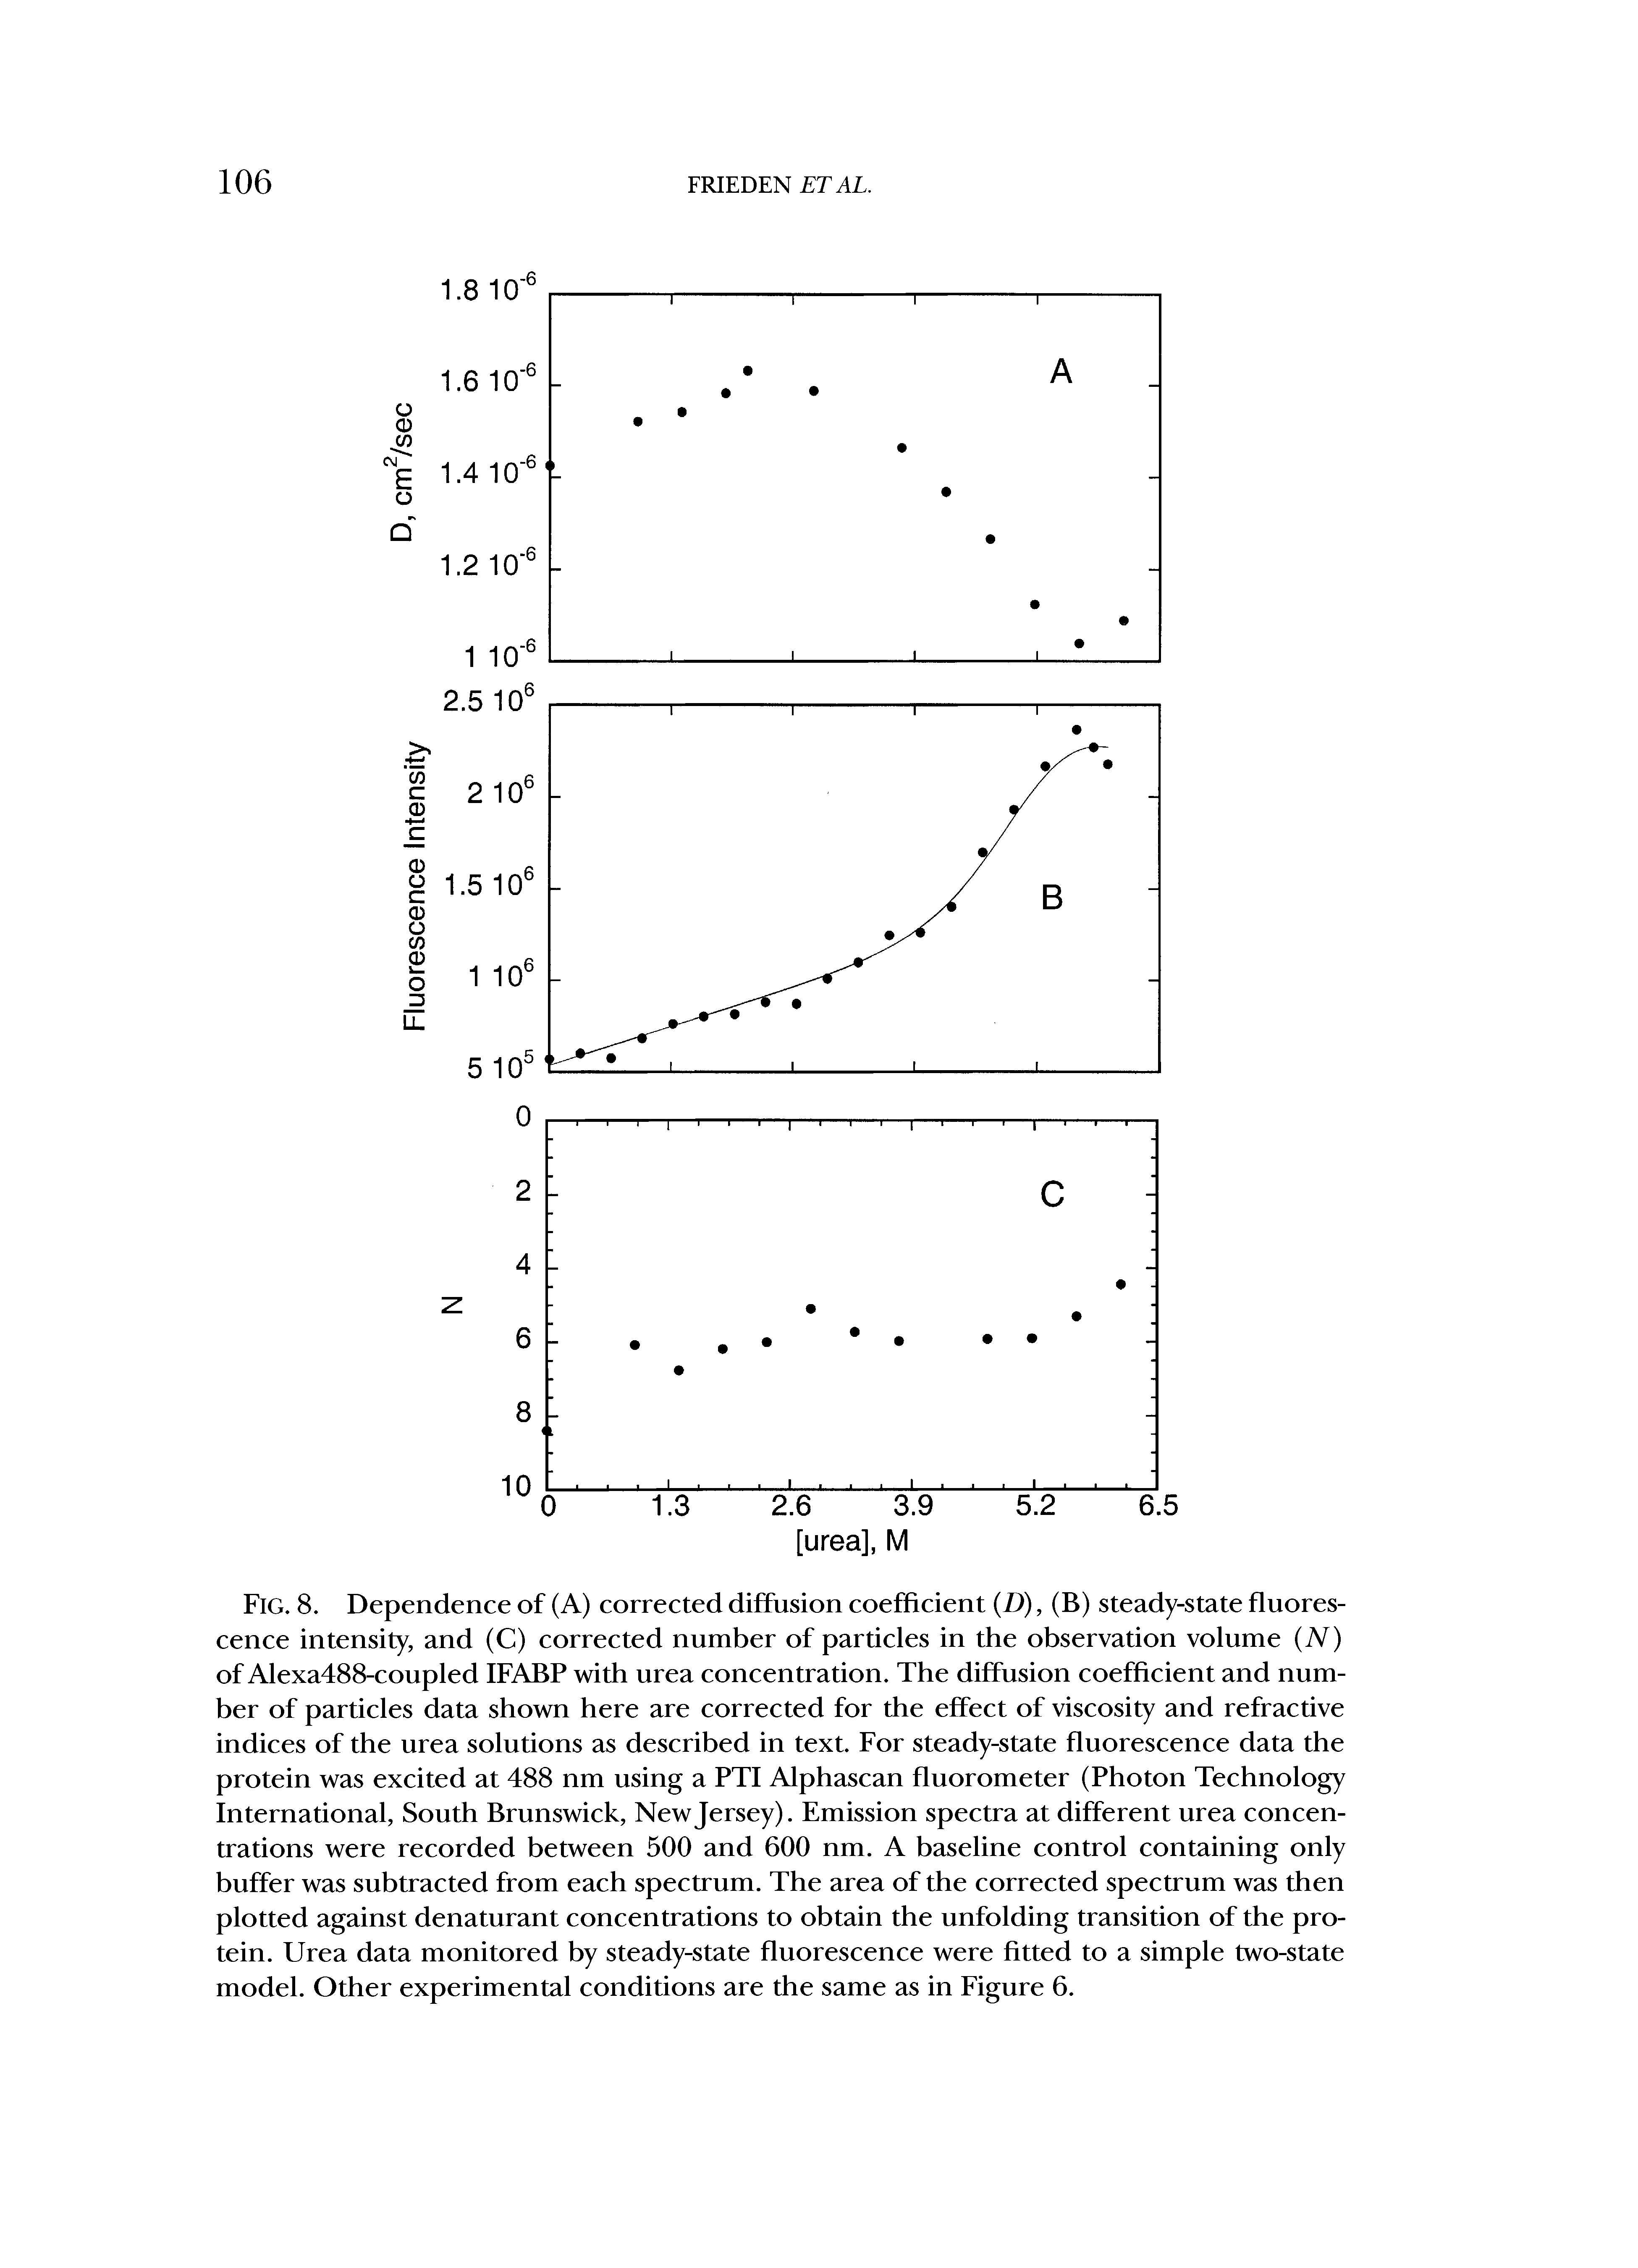 Fig. 8. Dependence of (A) corrected diffusion coefficient (D), (B) steady-state fluorescence intensity, and (C) corrected number of particles in the observation volume (N) of Alexa488-coupled IFABP with urea concentration. The diffusion coefficient and number of particles data shown here are corrected for the effect of viscosity and refractive indices of the urea solutions as described in text. For steady-state fluorescence data the protein was excited at 488 nm using a PTI Alphascan fluorometer (Photon Technology International, South Brunswick, New Jersey). Emission spectra at different urea concentrations were recorded between 500 and 600 nm. A baseline control containing only buffer was subtracted from each spectrum. The area of the corrected spectrum was then plotted against denaturant concentrations to obtain the unfolding transition of the protein. Urea data monitored by steady-state fluorescence were fitted to a simple two-state model. Other experimental conditions are the same as in Figure 6.